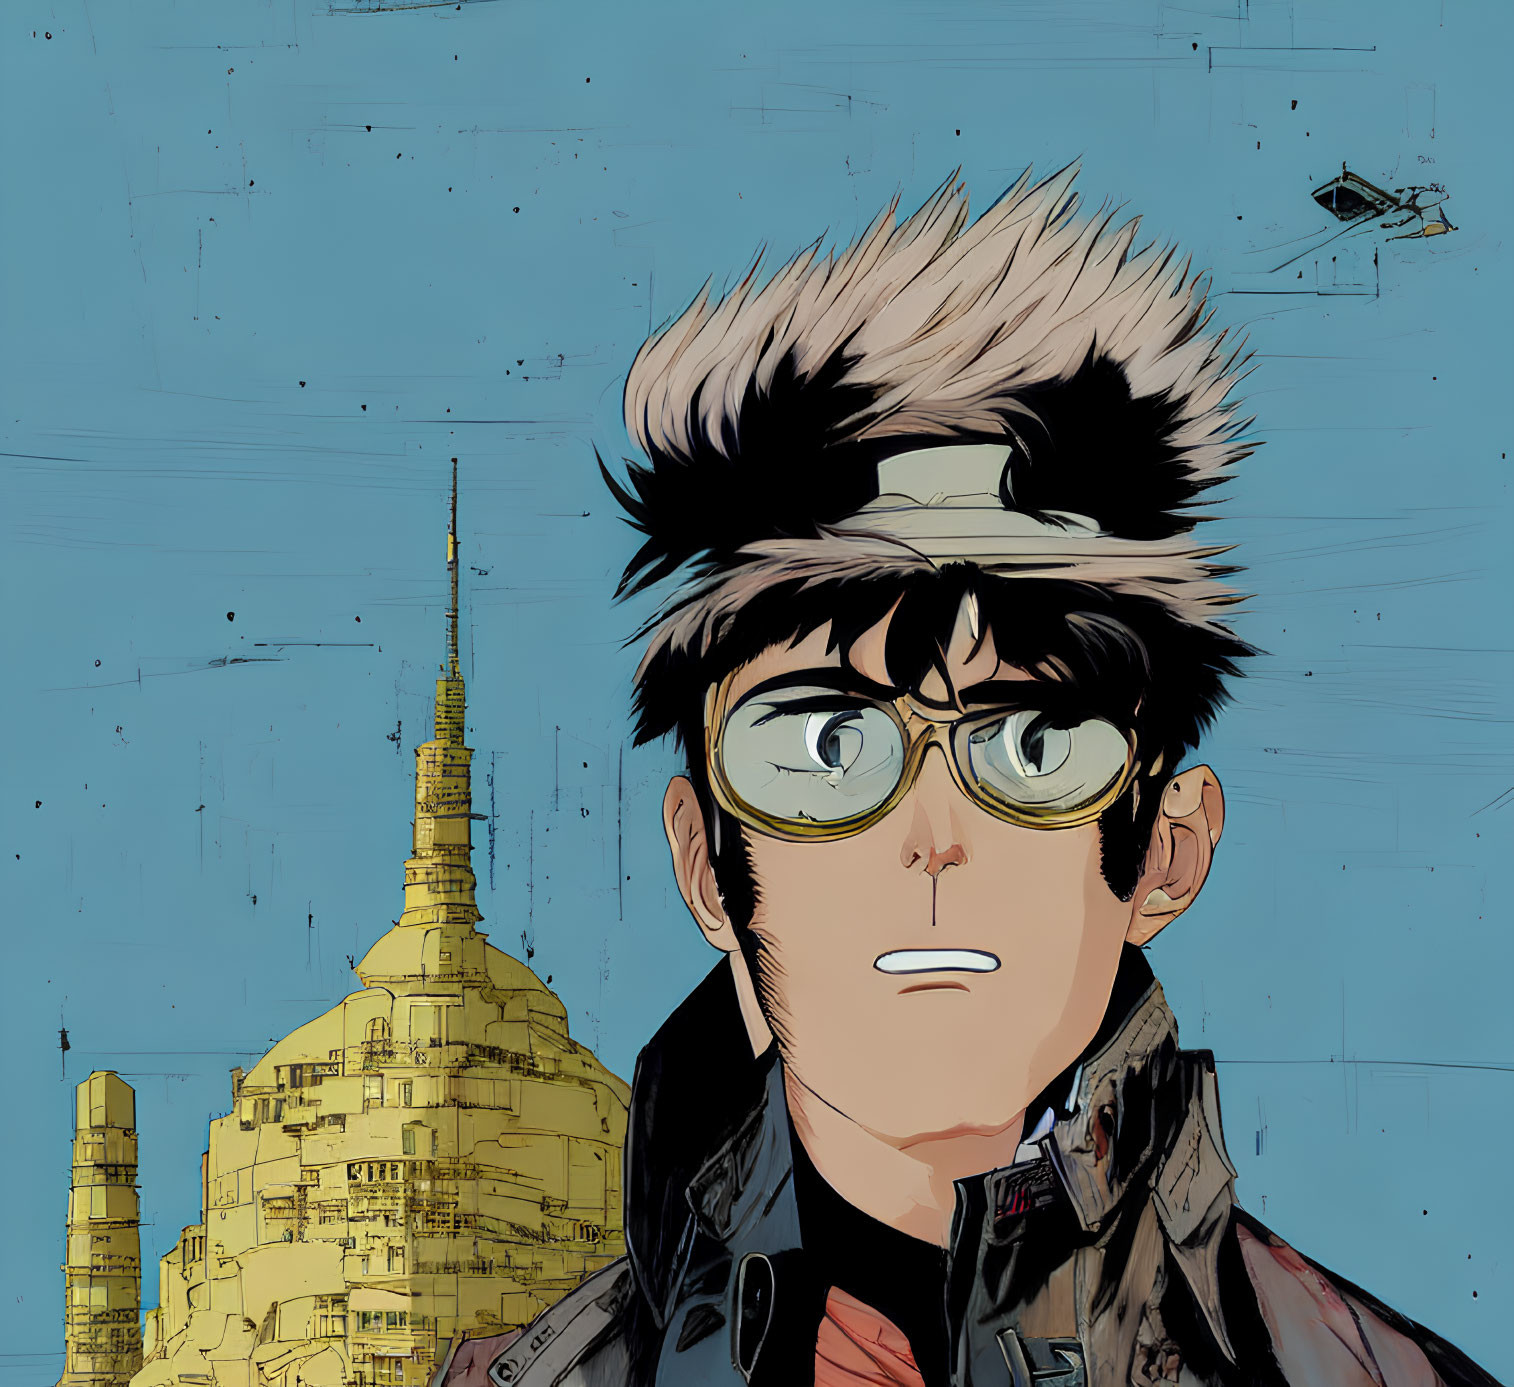 Young man with spiky hair in glasses and futuristic jacket against yellow building